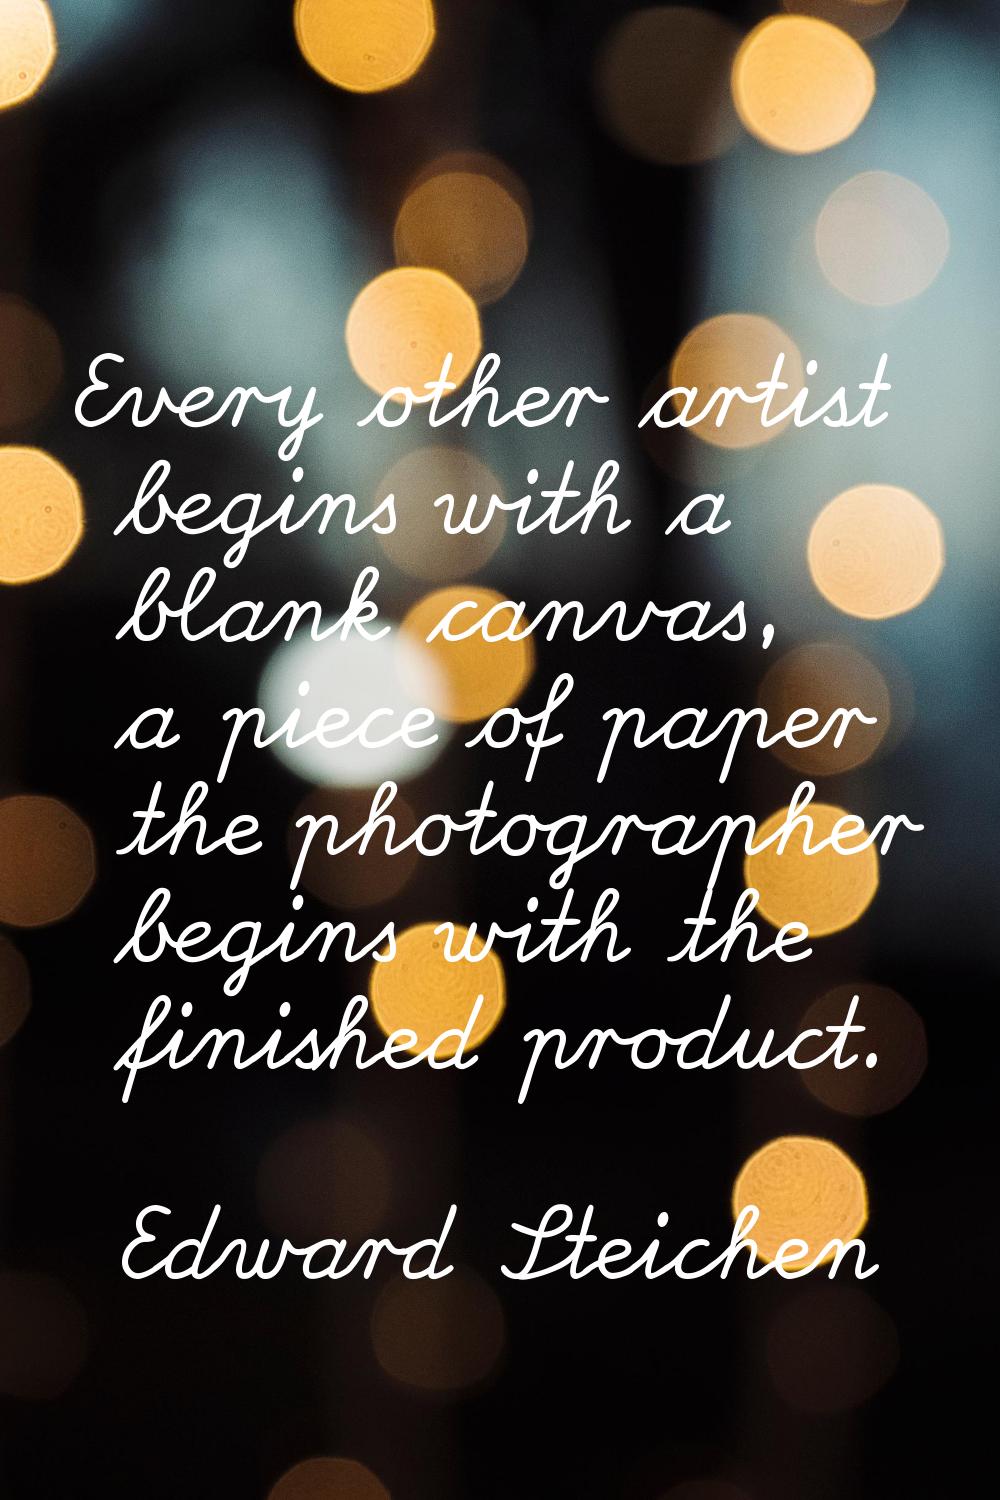 Every other artist begins with a blank canvas, a piece of paper the photographer begins with the fi